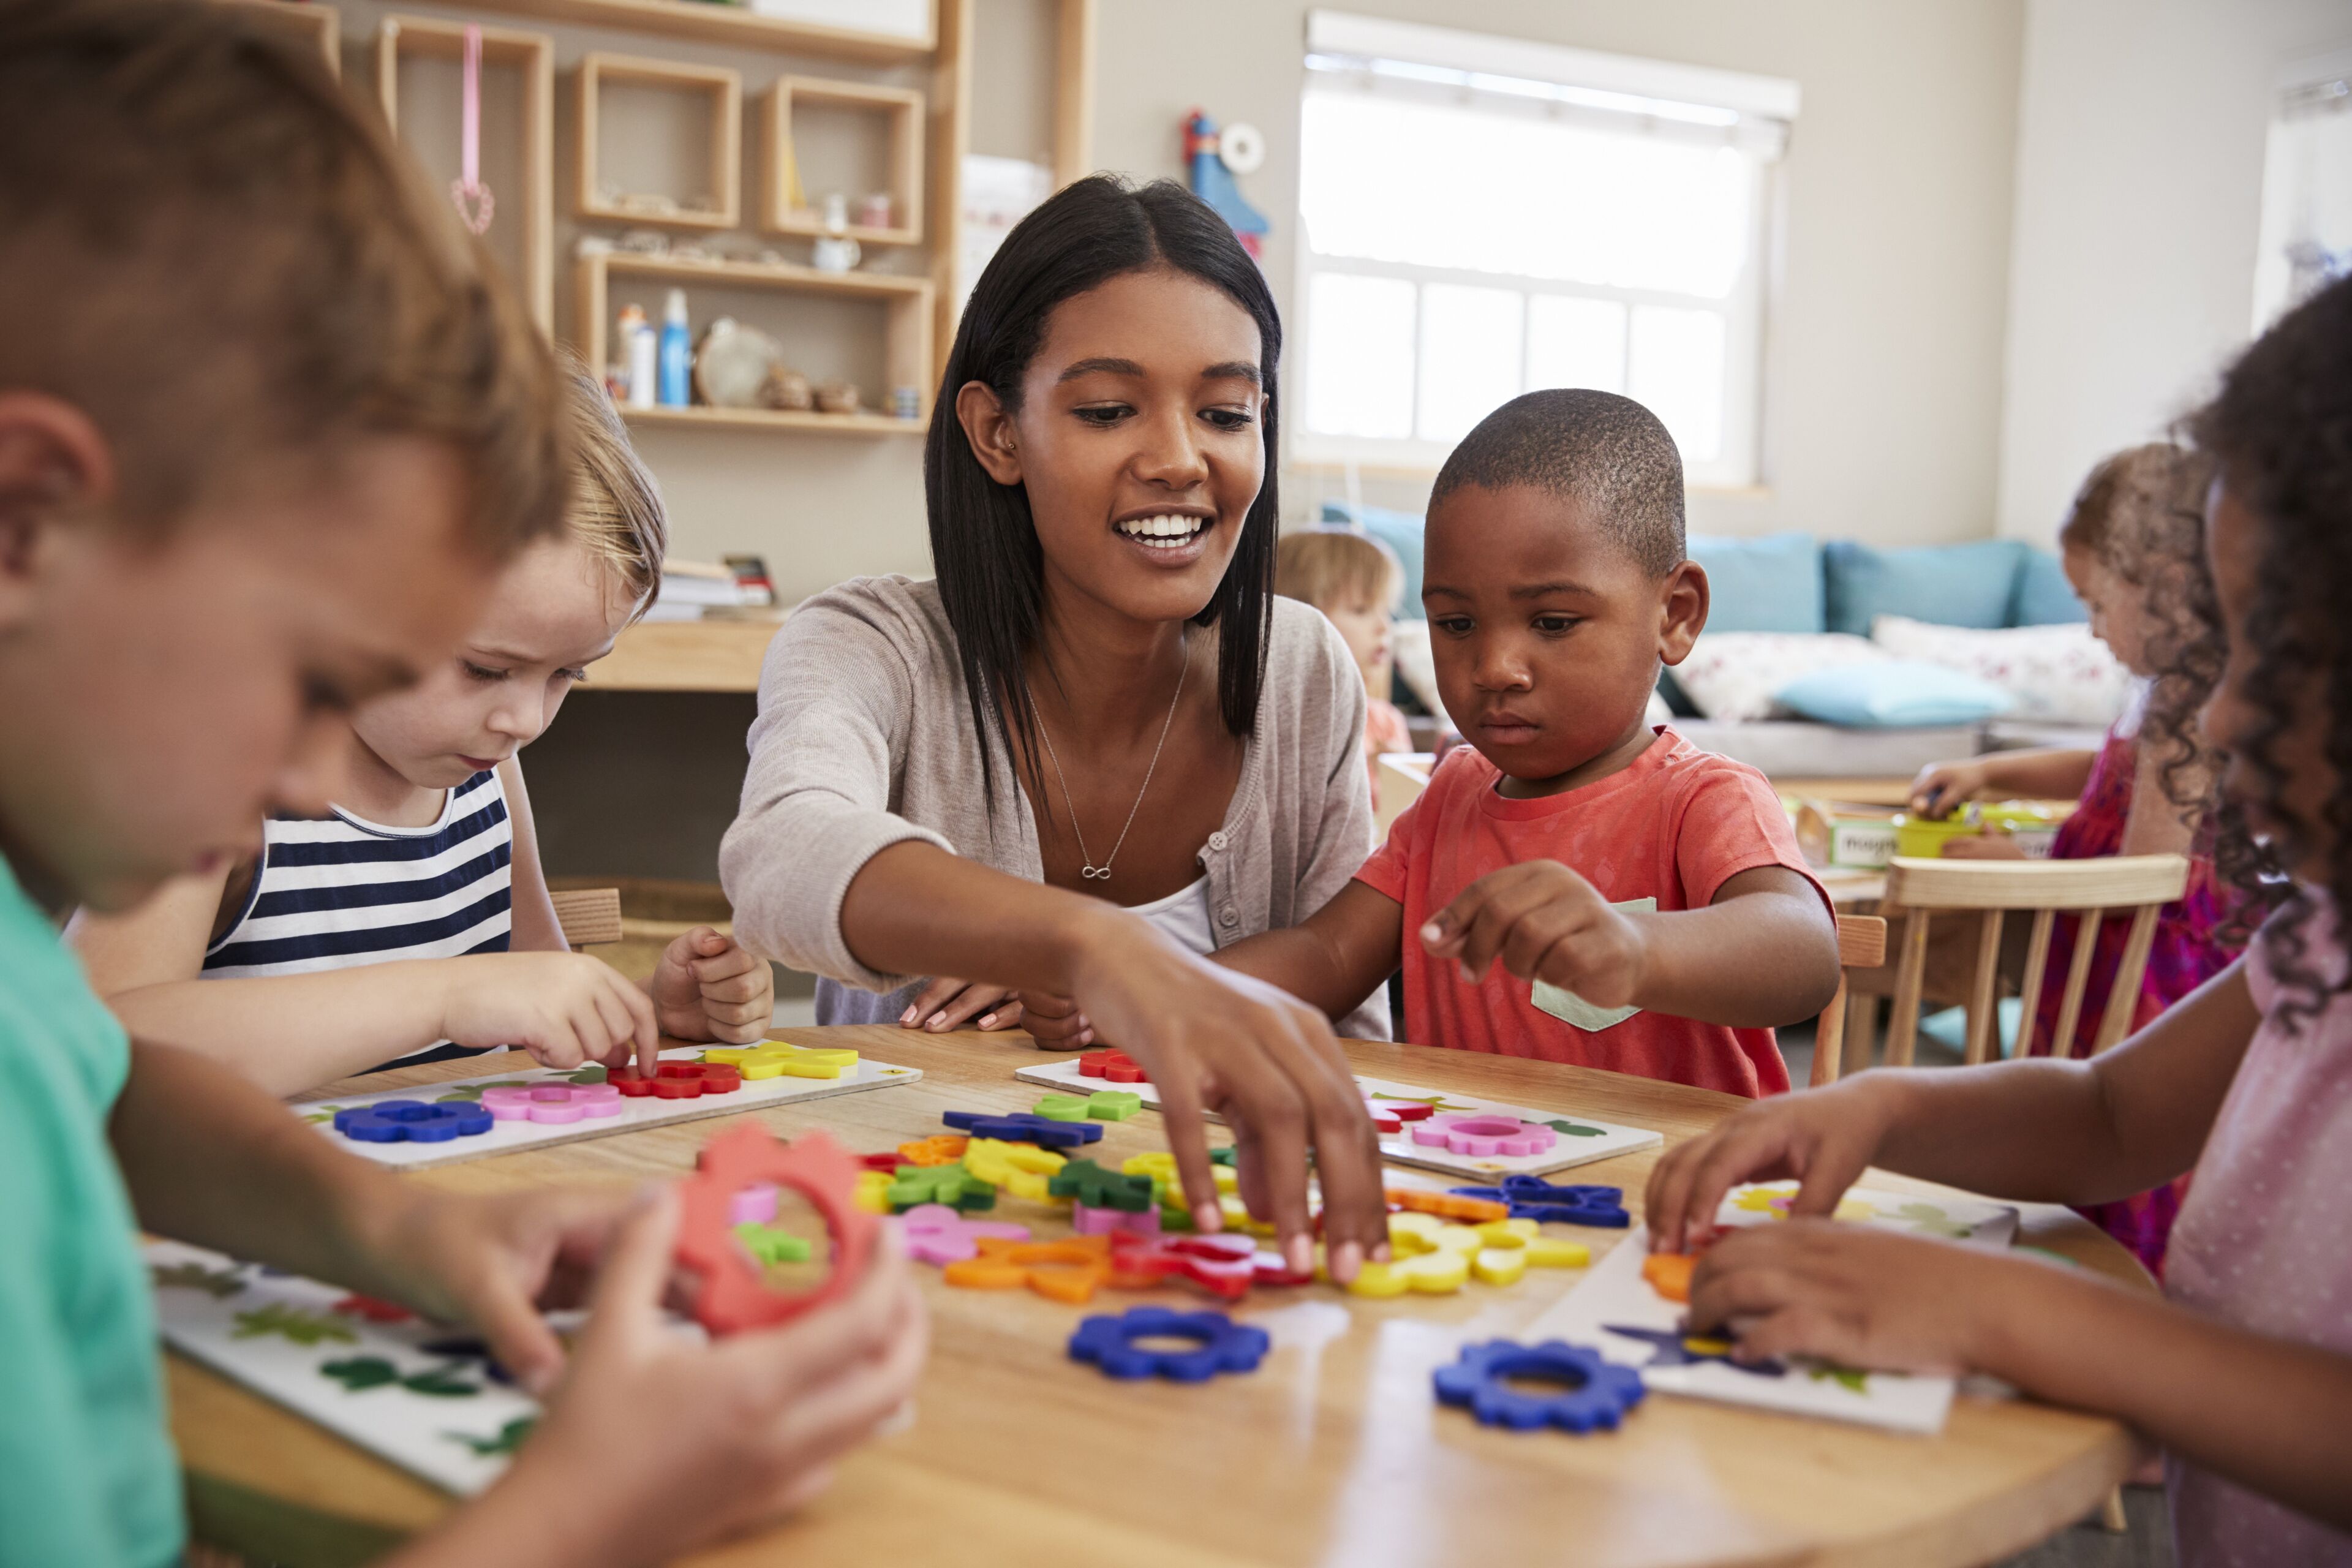 ImageA teacher engages with young children at a table, guiding them through a playful lesson on shapes and colors using educational toys.